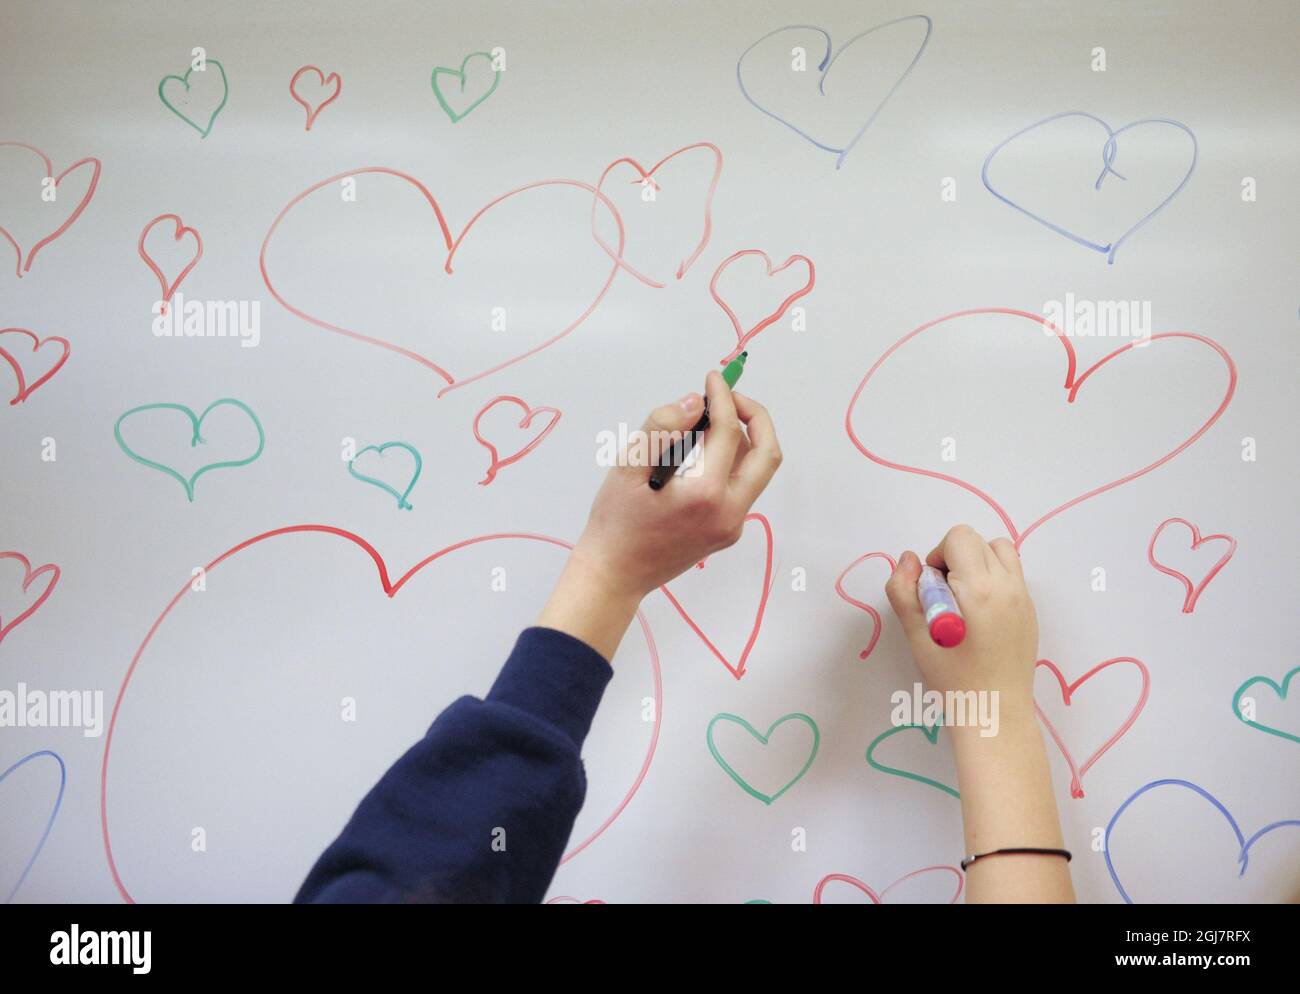 Children drawing hearts on whiteboard Stock Photo